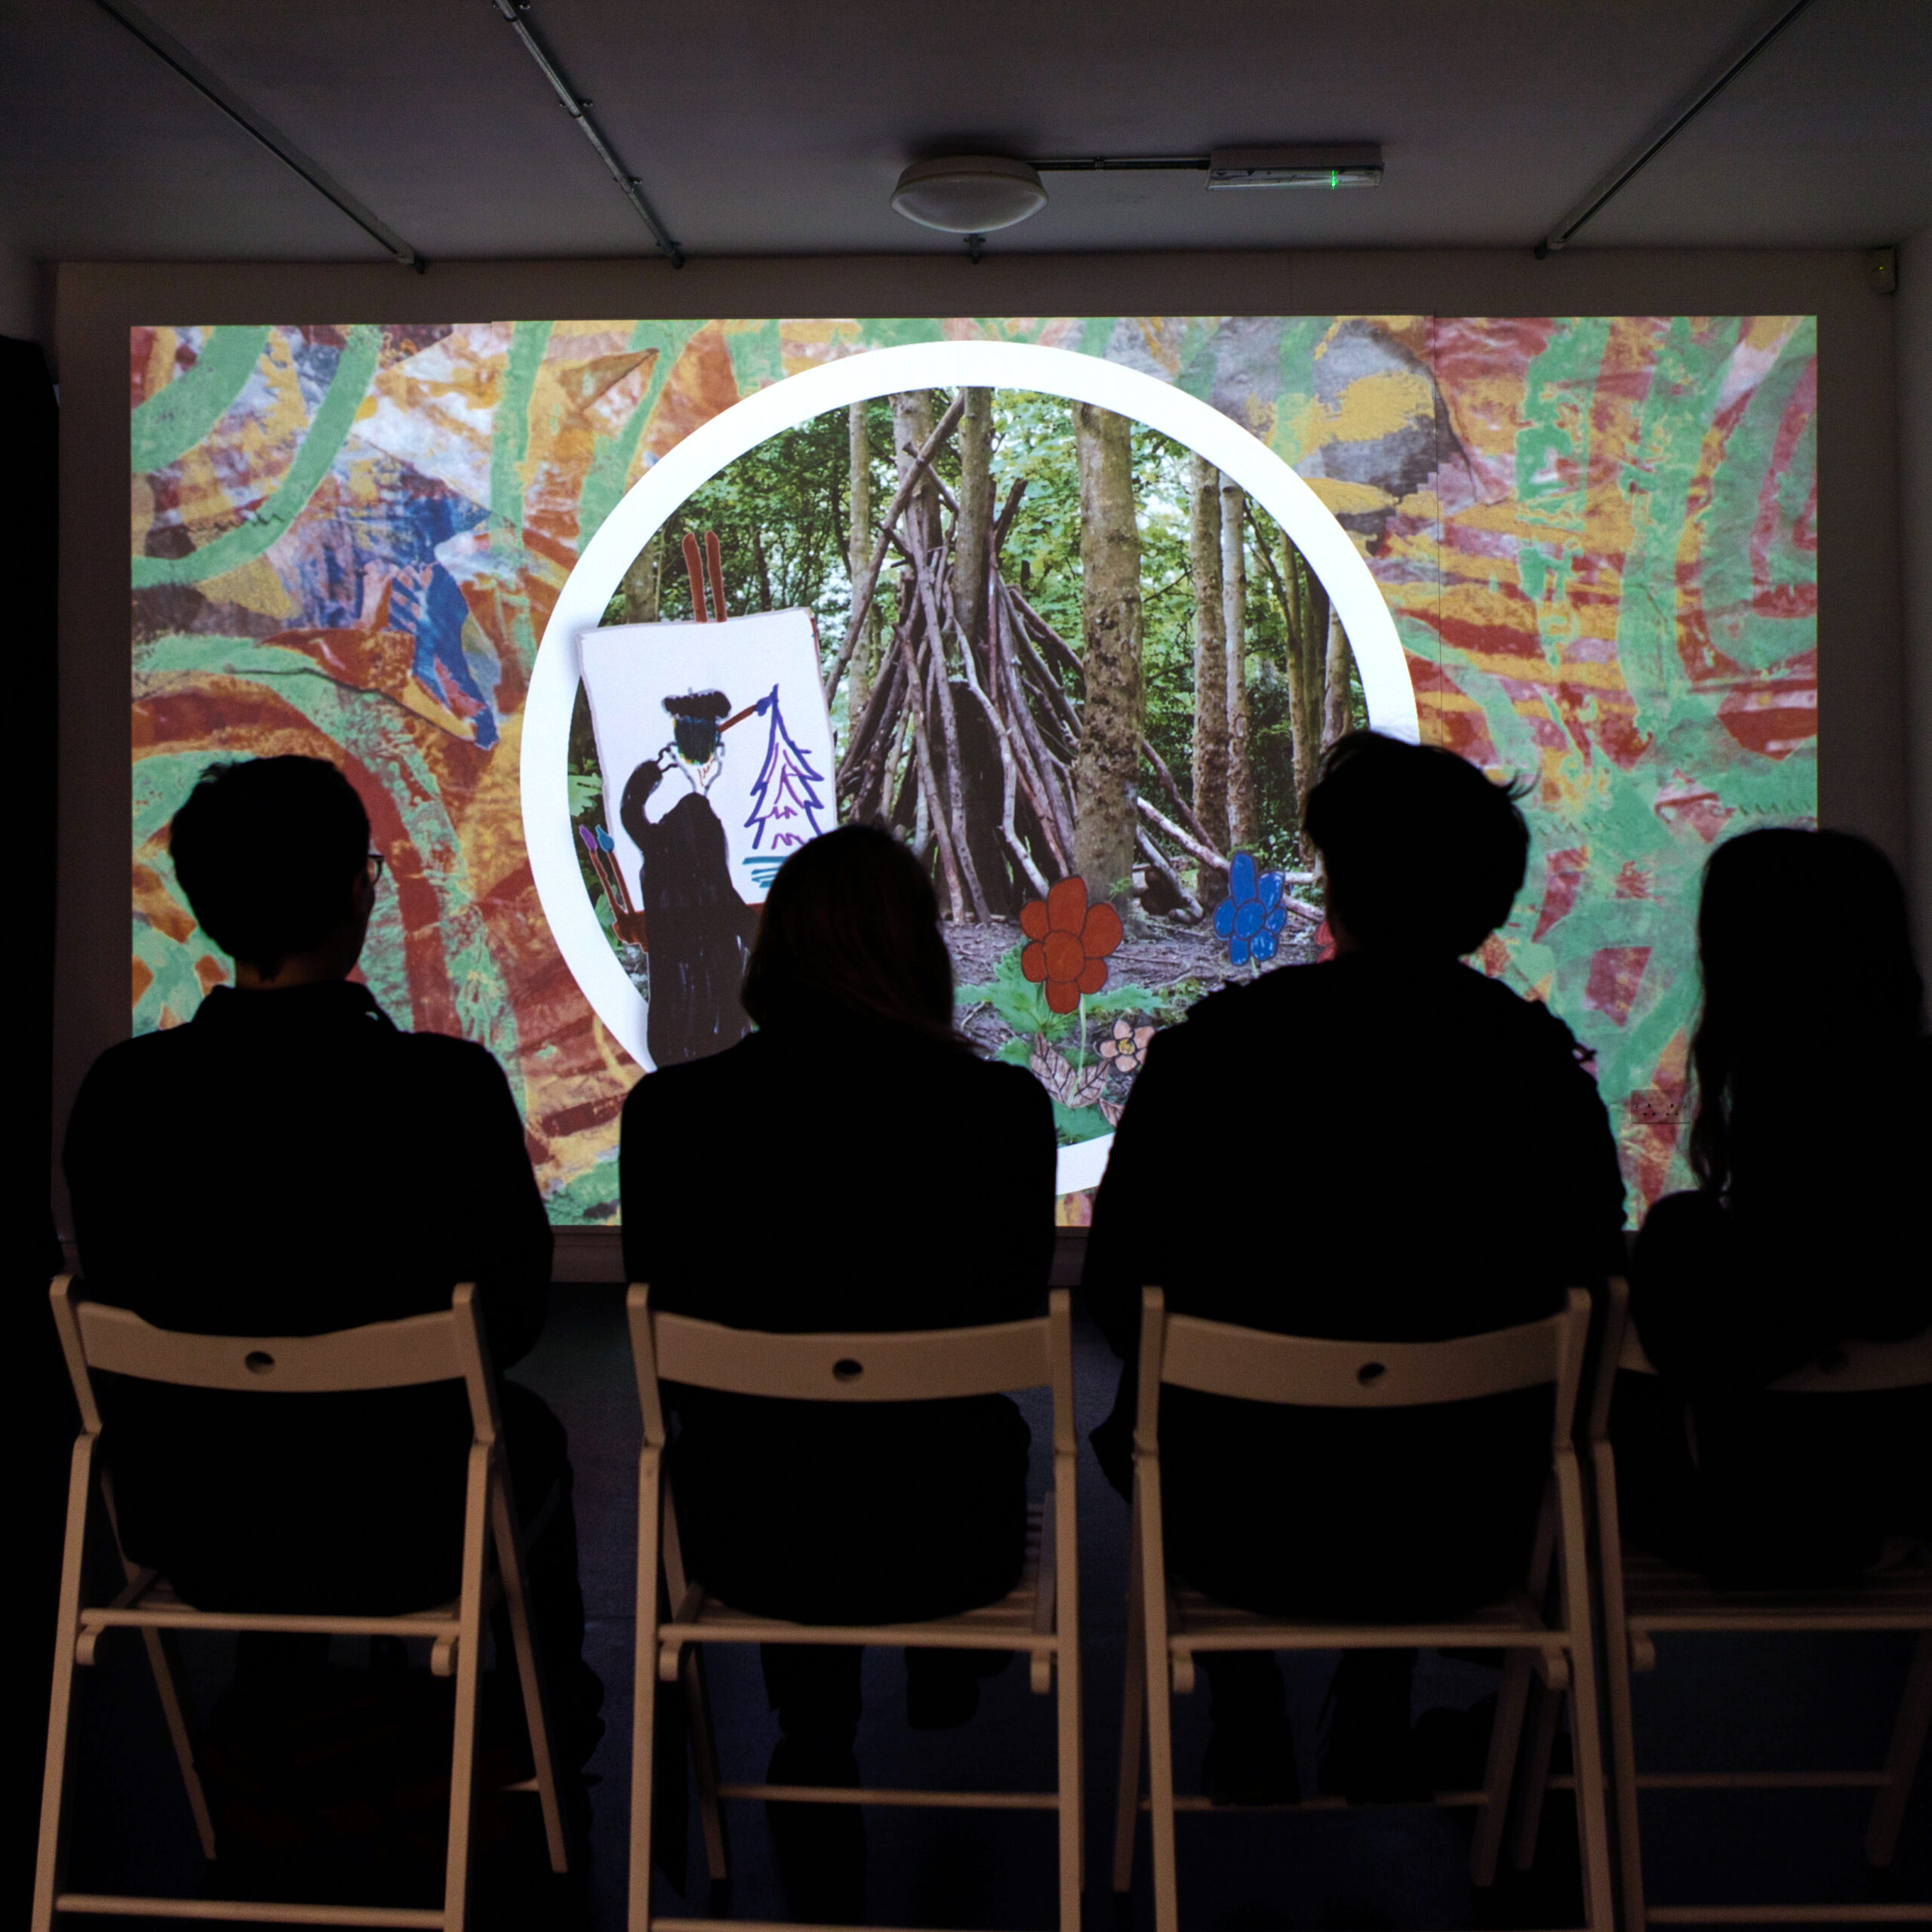 Four people are seated in front of a large projection screen at Brighton CCA Dorset Place; they are silhouetted in a darkened room. On the screen is a still image from 632700, showing an red and green abstract pattern around the edge, a central white circular band with a photograph of a den made from sticks in the woods inside the circle, a drawing of red and blue flowers in the bottom right, and a drawing of a person painting a landscape scene on canvas in the bottom left.